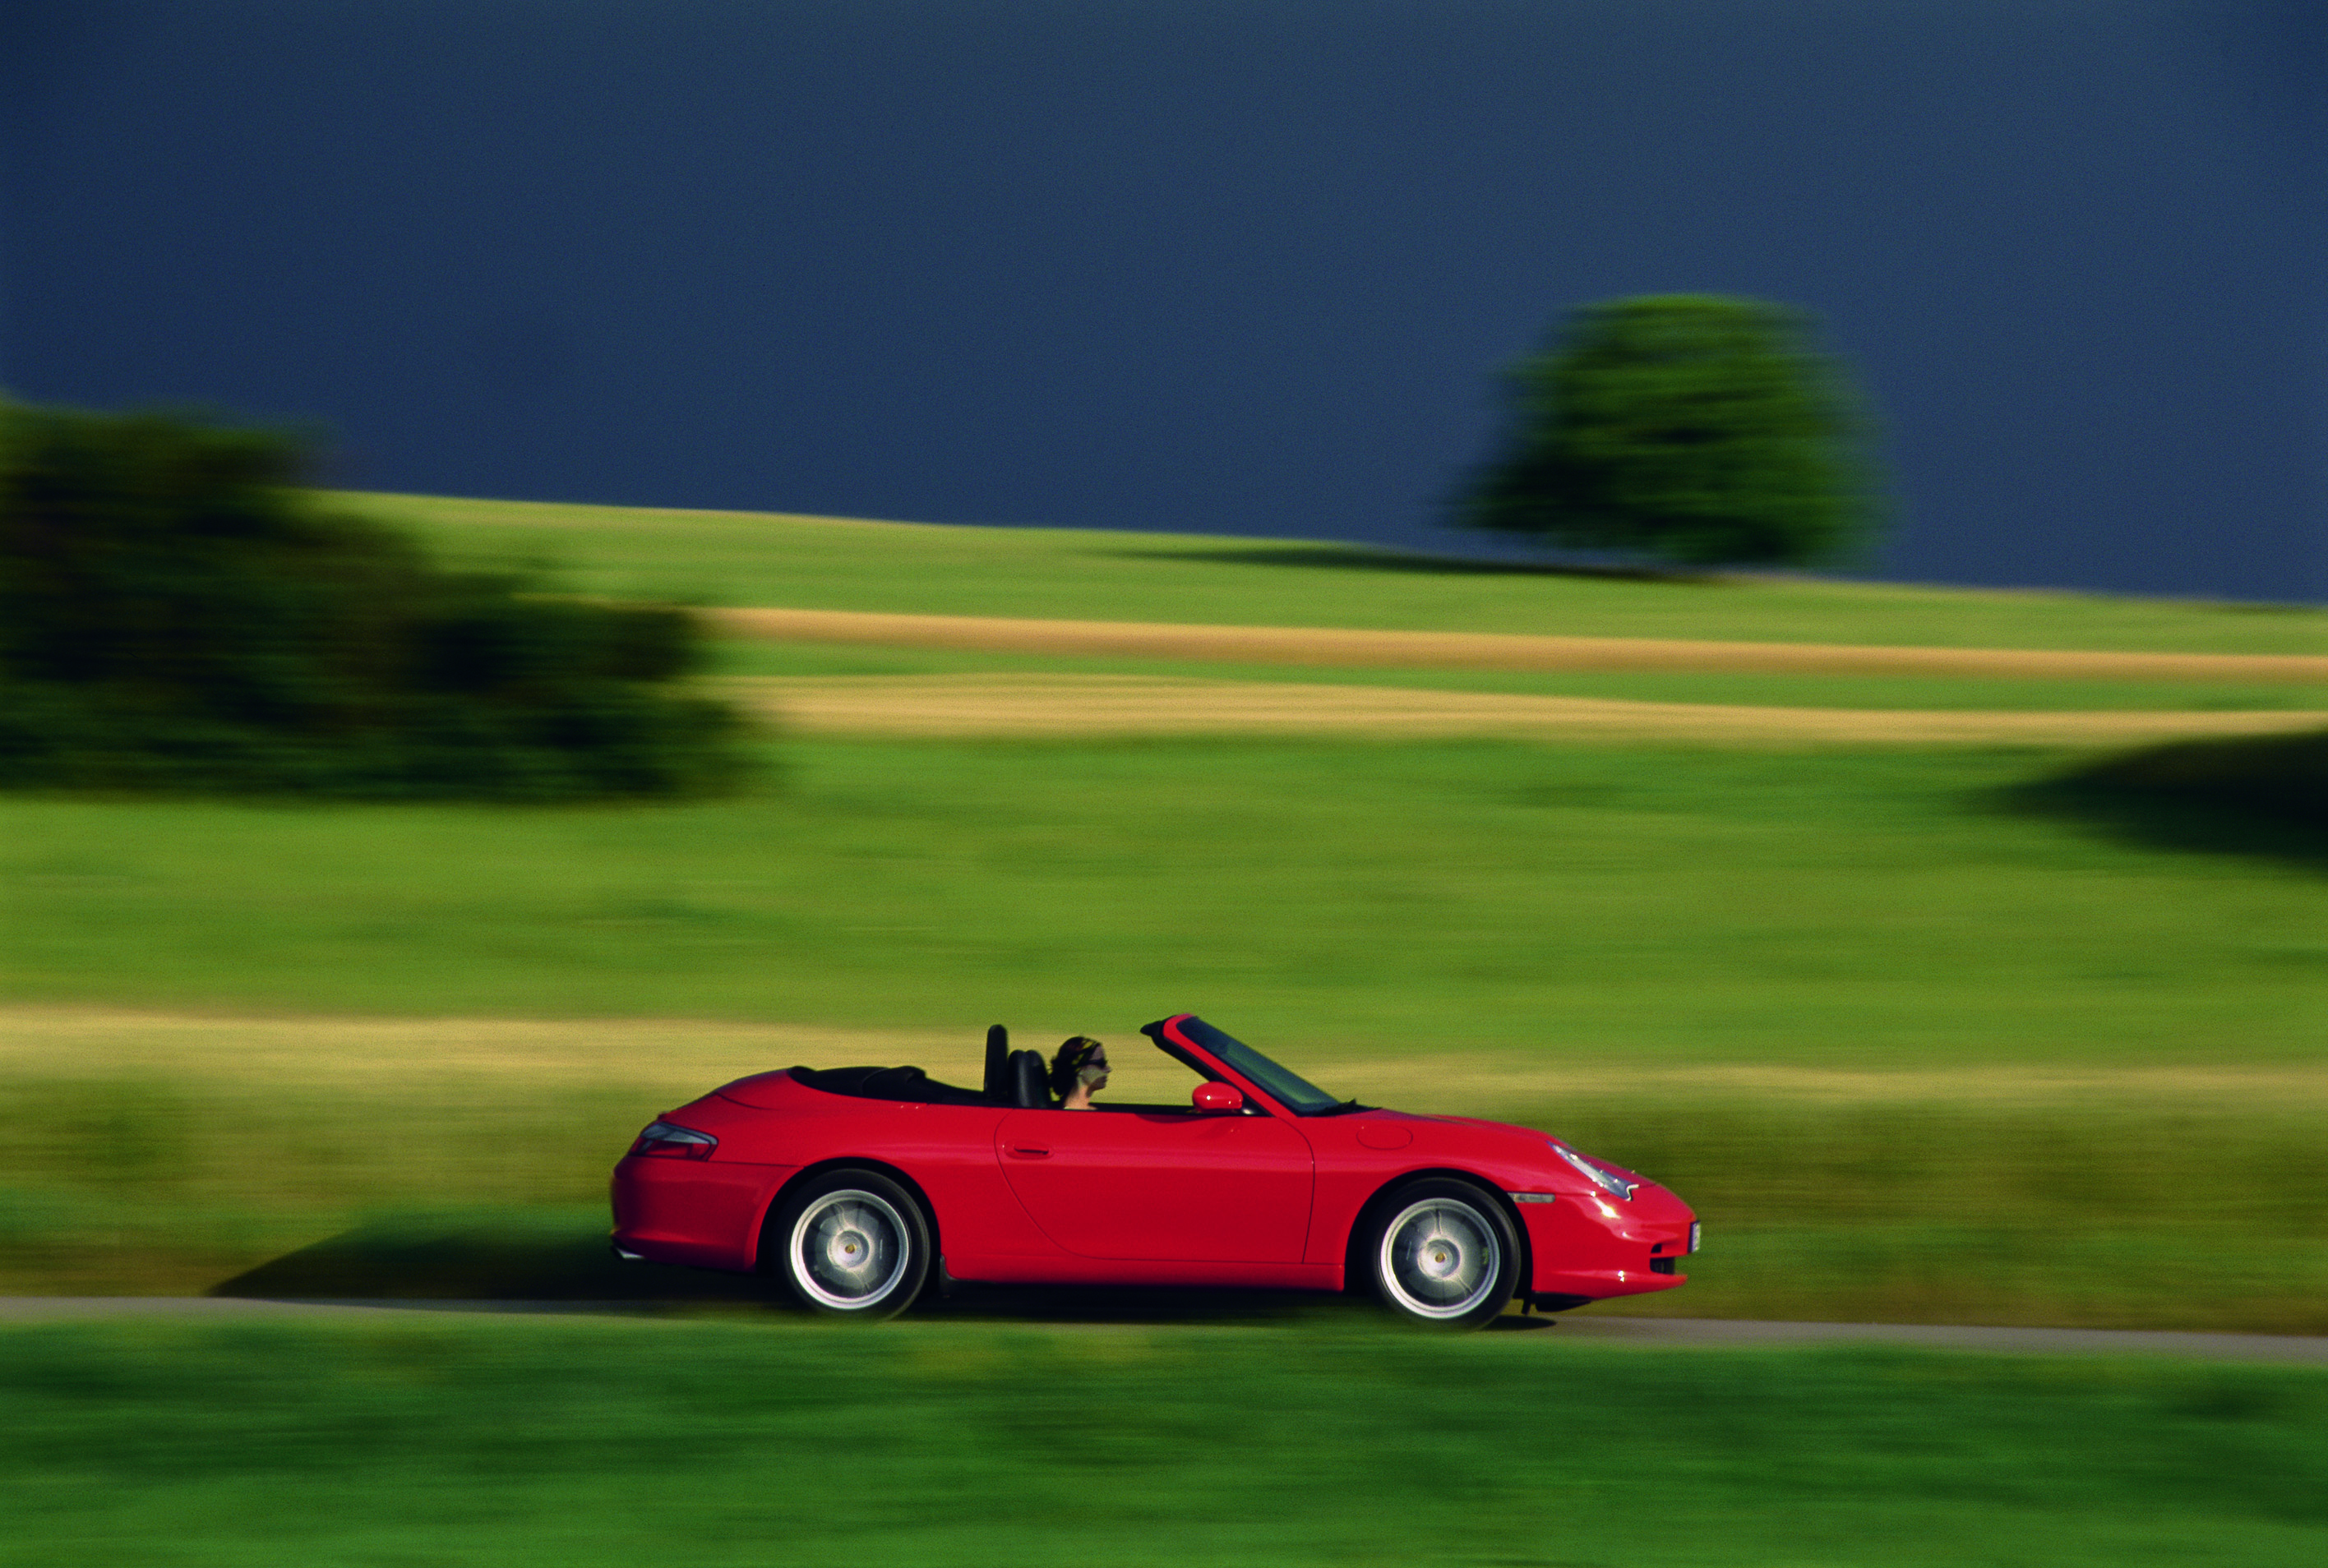 With its wind deflector in place, the 996 Cabrio showed off the graceful lines Pinky Lai had labored to produce. Cabrio buyers received an aluminum hardtop as part of their purchase price. Porsche Archiv